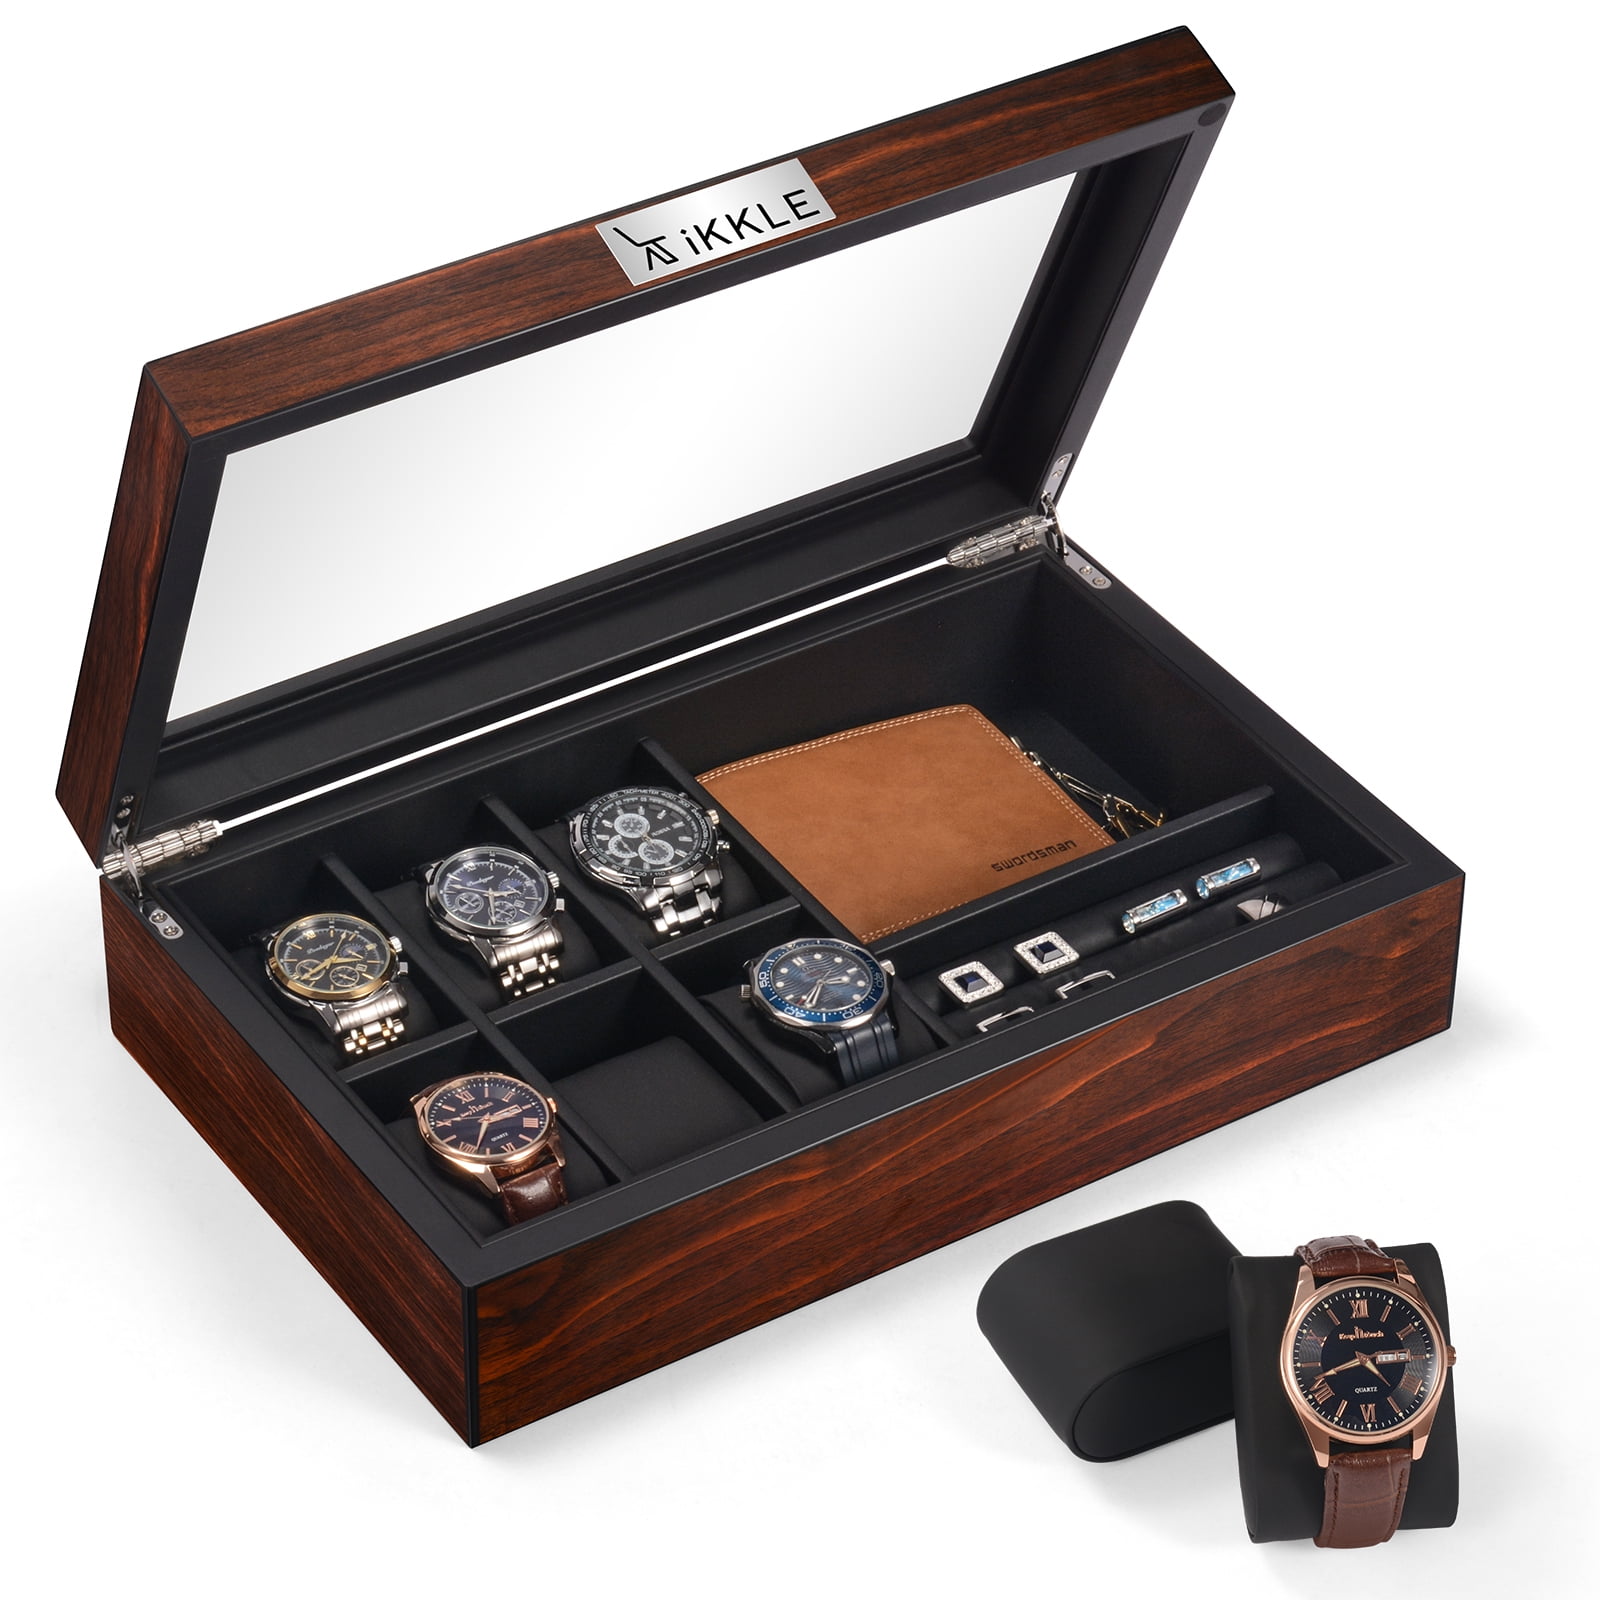  NuAngela Single Watch Case Box PU Leather Display Organizer, Luxury  Watch Storage Holder For Wristwatches Smart Watches, Portable Jewelry  Bearer Gift Case For Women/Men, Mother's Day Birthday Valentine's Day Gift  Box (